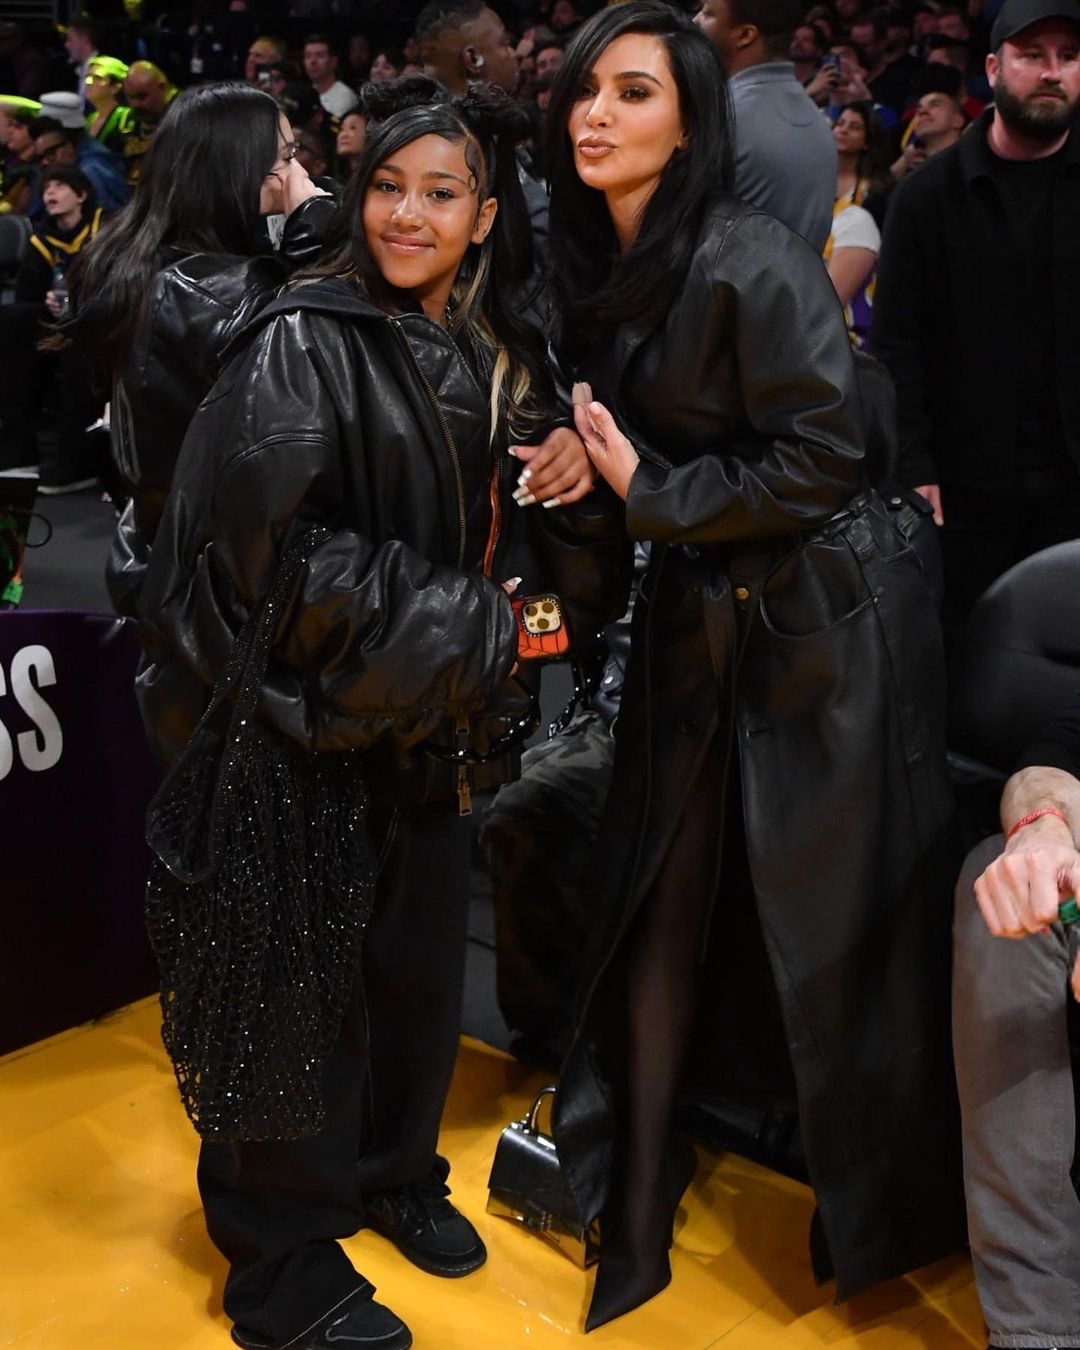 Kim Kardashian and Northwest Spotted Courtside in All Black Balenciaga Outfits 1